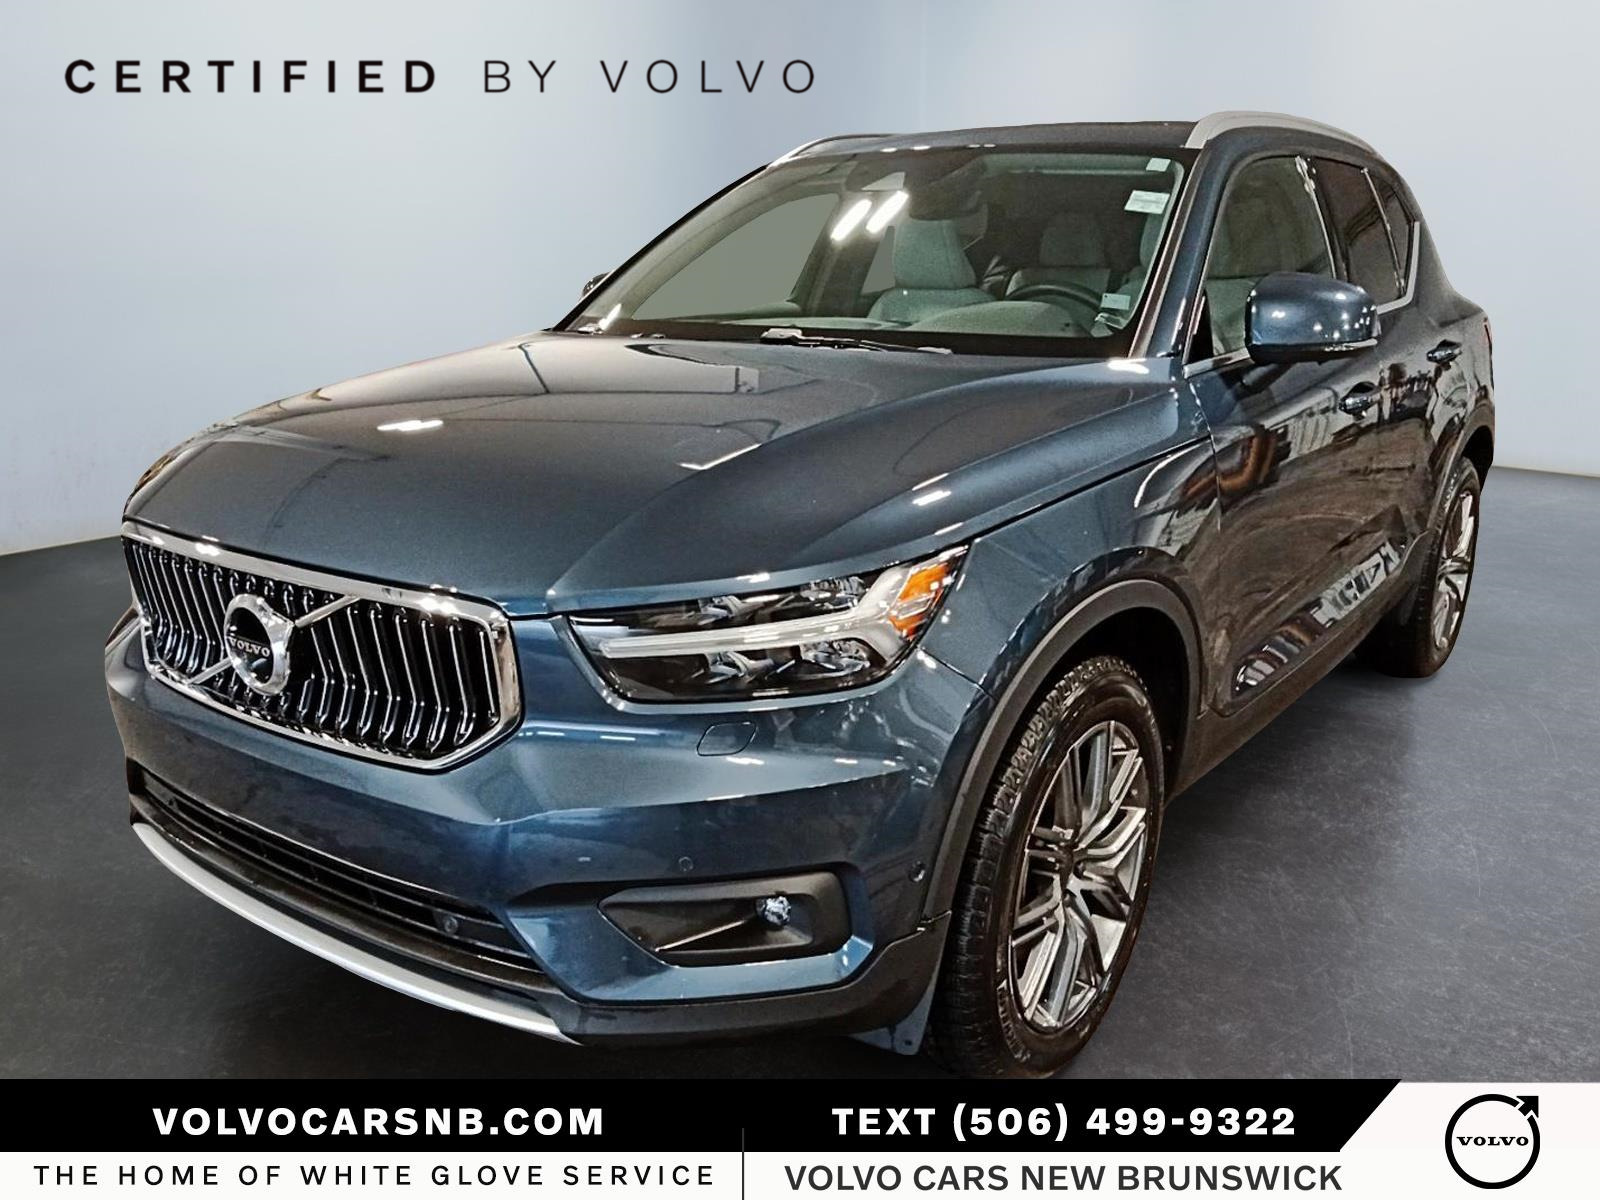 2020 Volvo XC40 AWD | Certified Pre Owned!